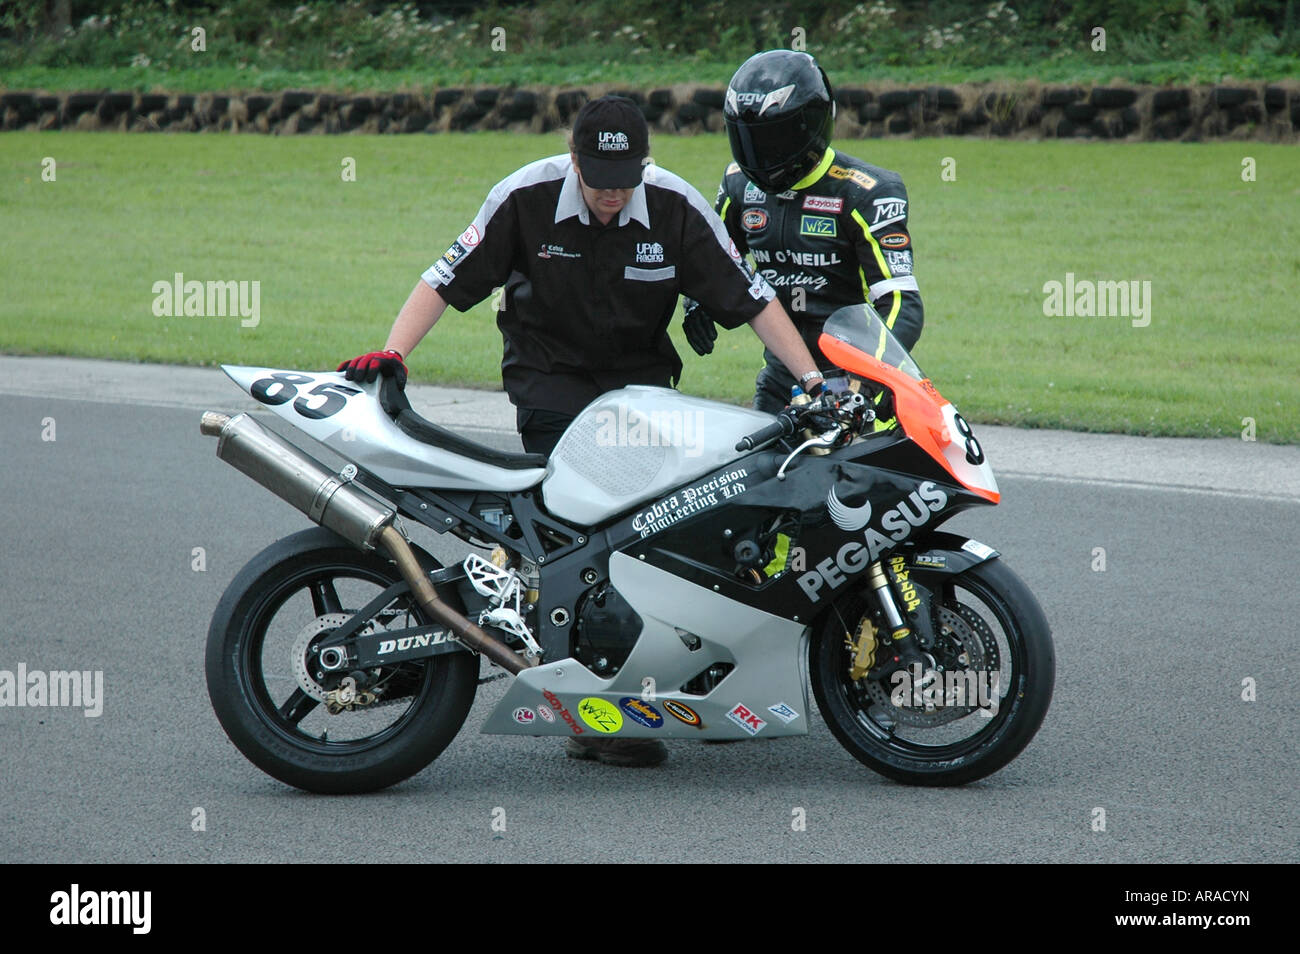 Endurance Motorcycle Racer Lining Up On The Grid at Pembrey UK Stock Photo